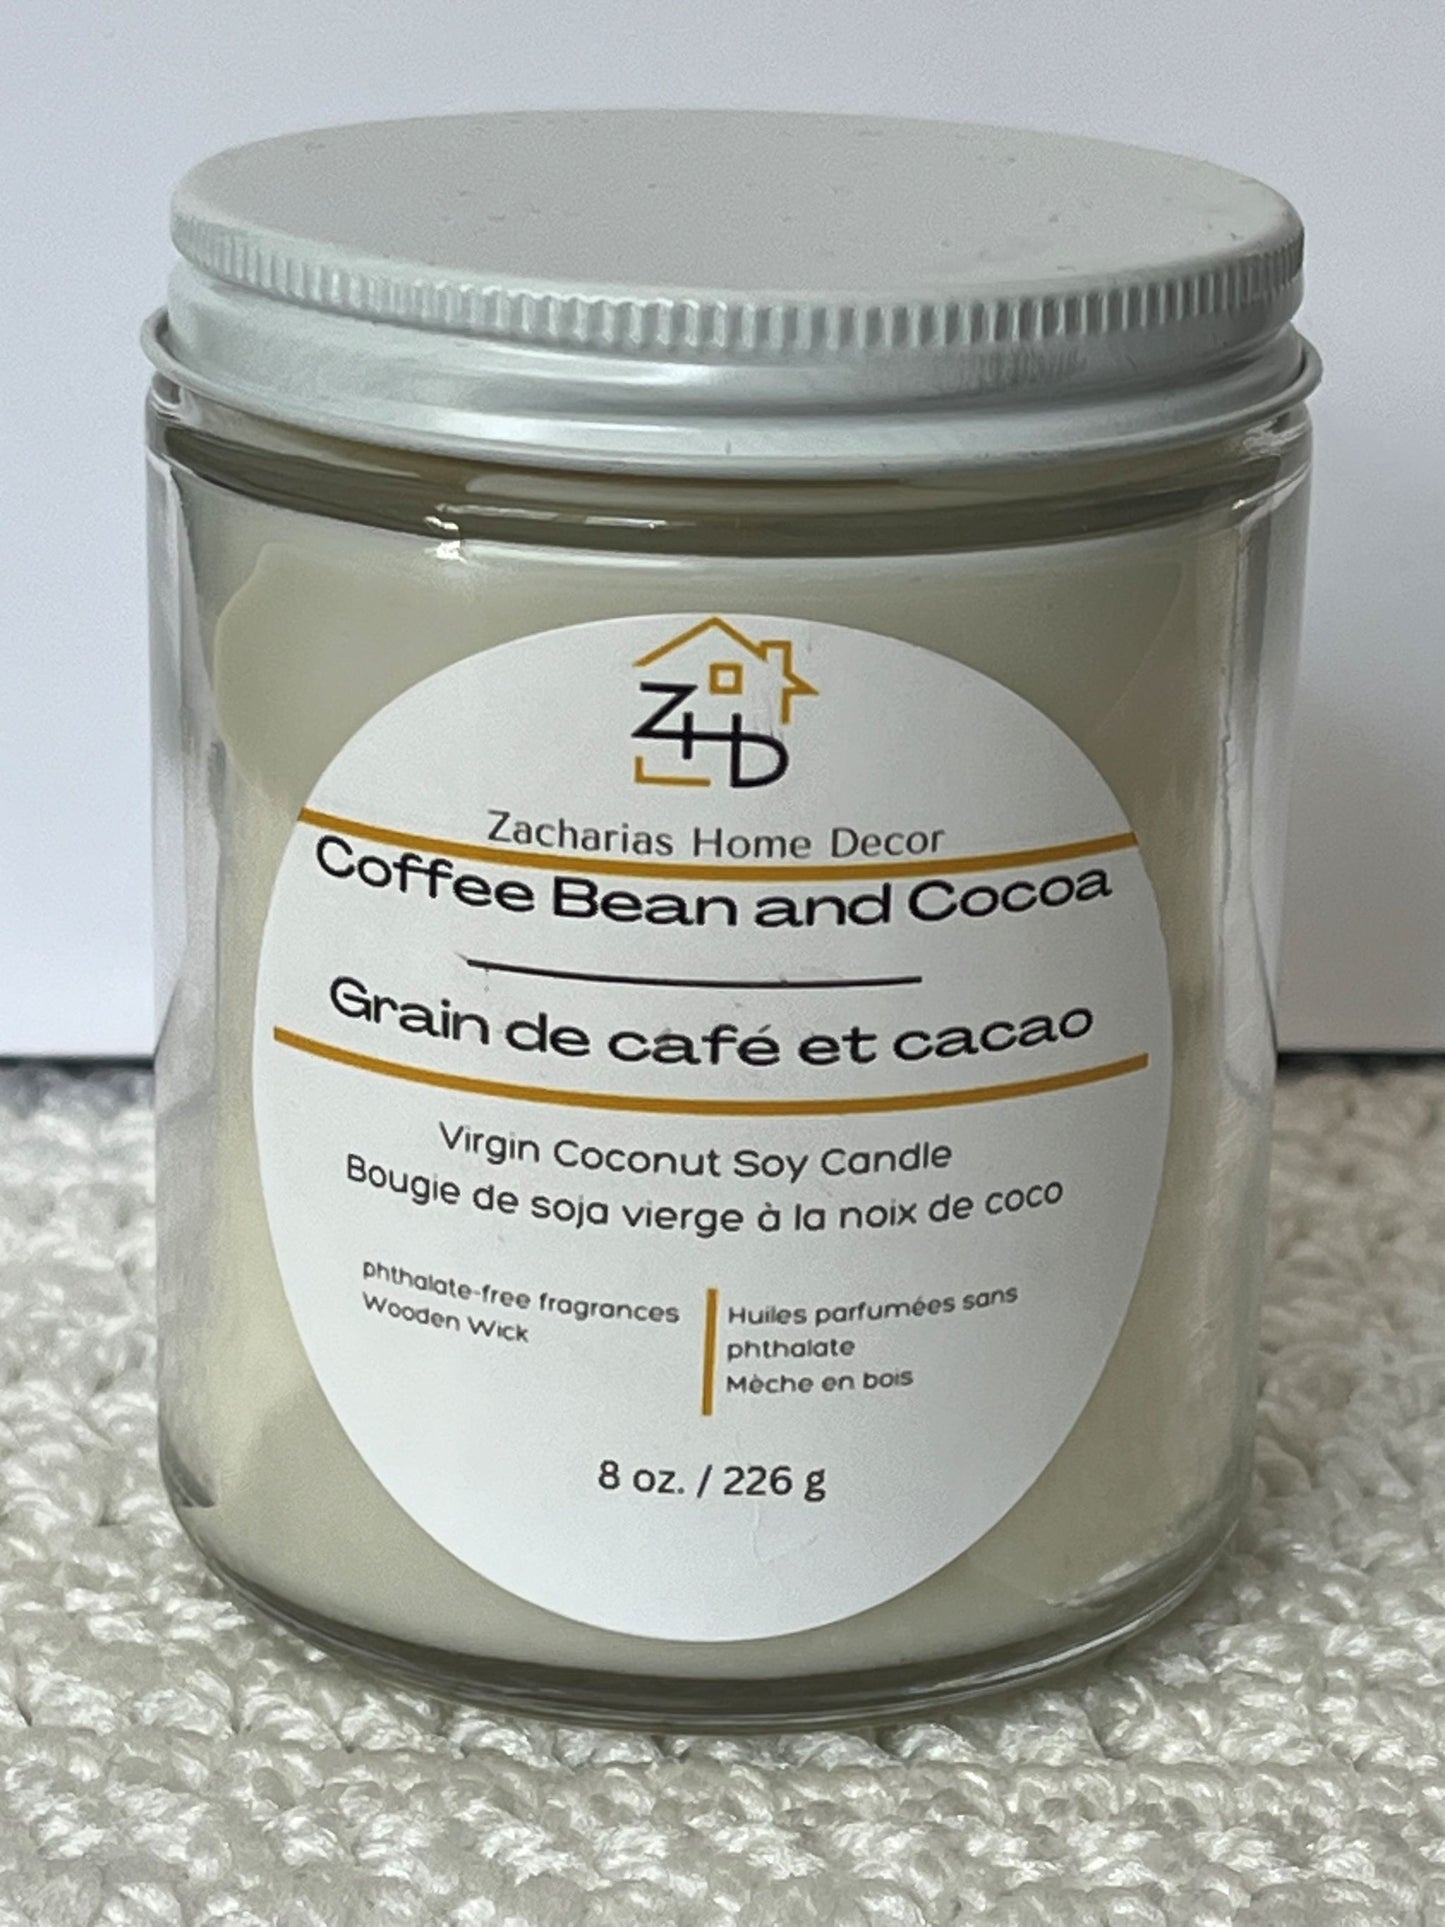 Virgin Coconut Soy Candle  Coffee Bean and Cocoa 